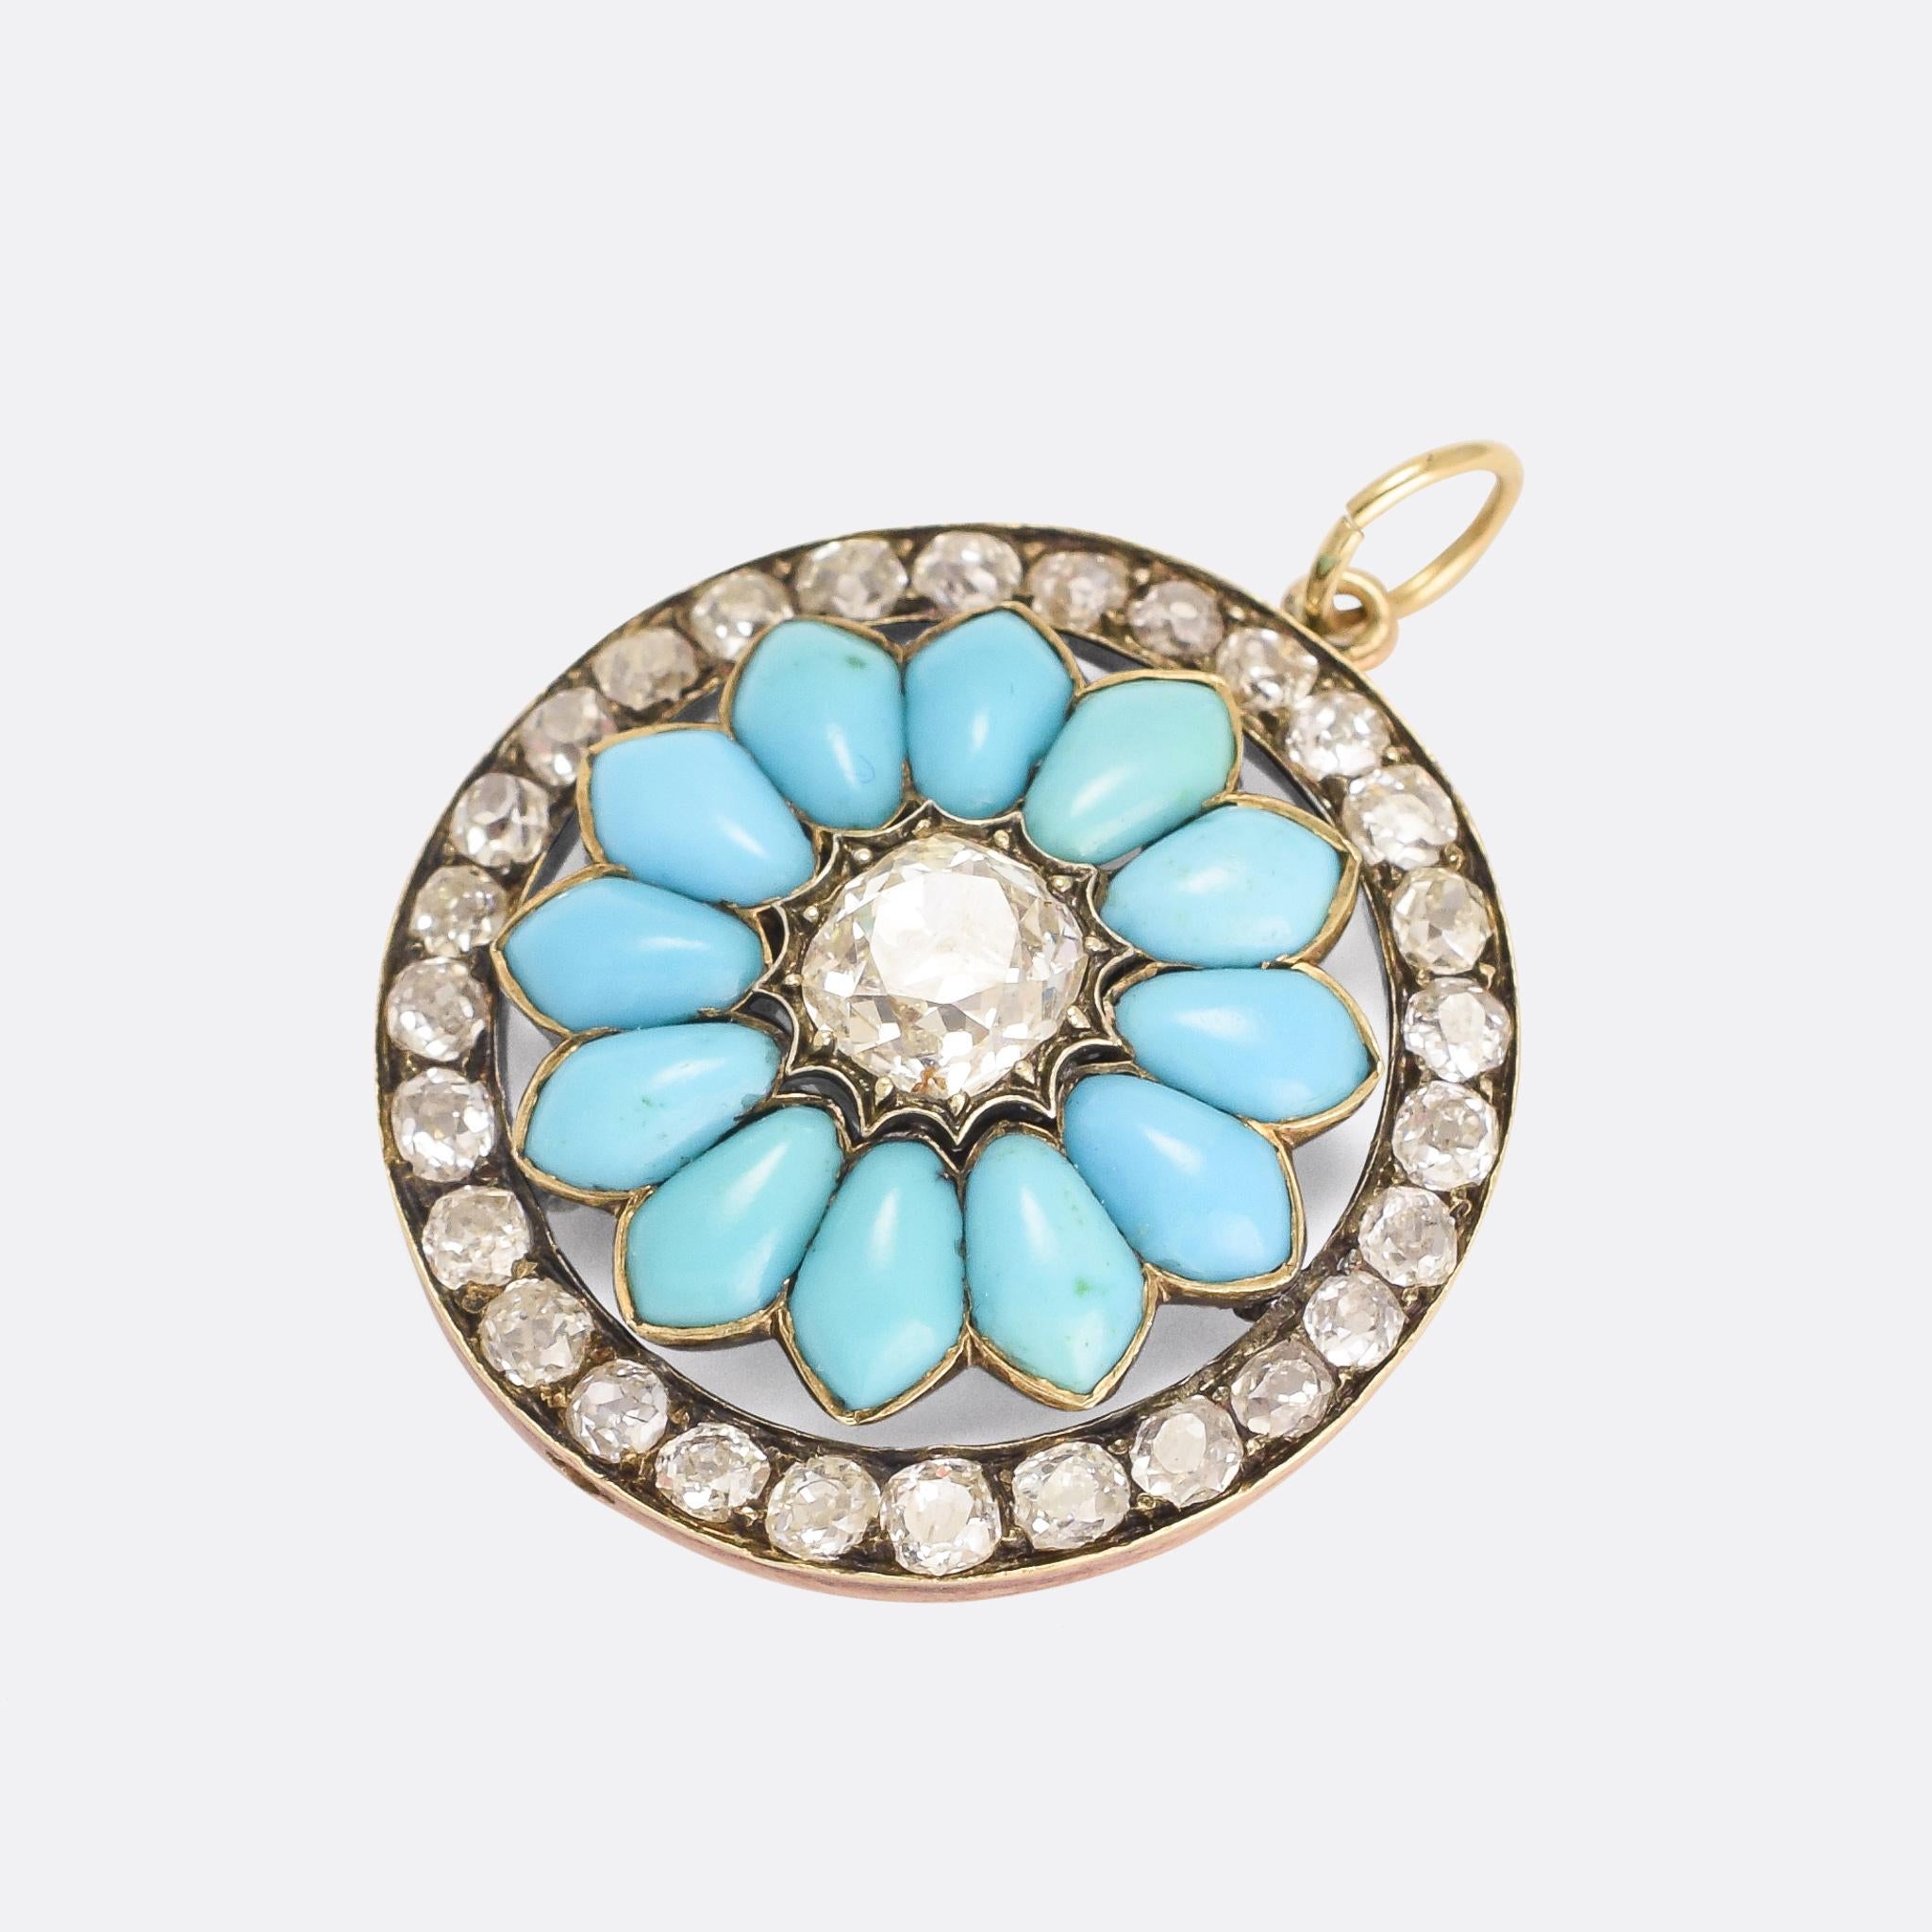 A stunning mid-Victorian halo flower pendant, set with unusually shaped turquoise cabochon petals around a central 1.25ct cushion cut diamond. The halo boarder is set with further old mine cut diamonds, and the piece dates from the 1870s. It's